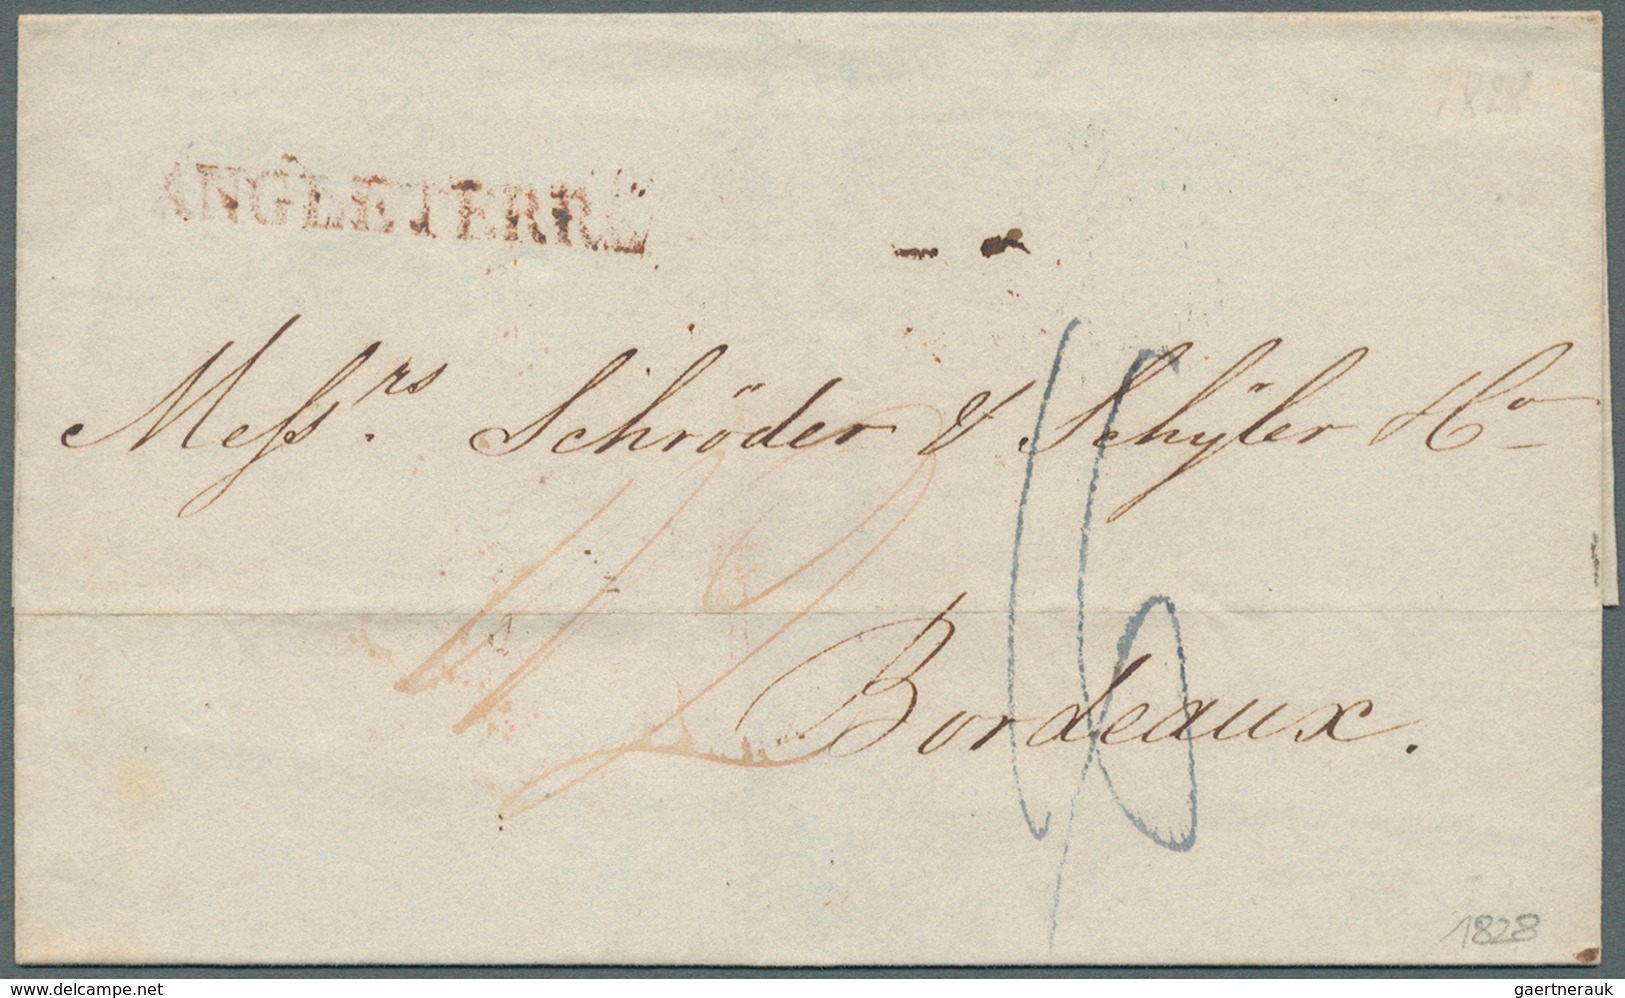 Großbritannien - Vorphila: 1791/1850 ca., 360 early covers with a great variety of cancellations, ma